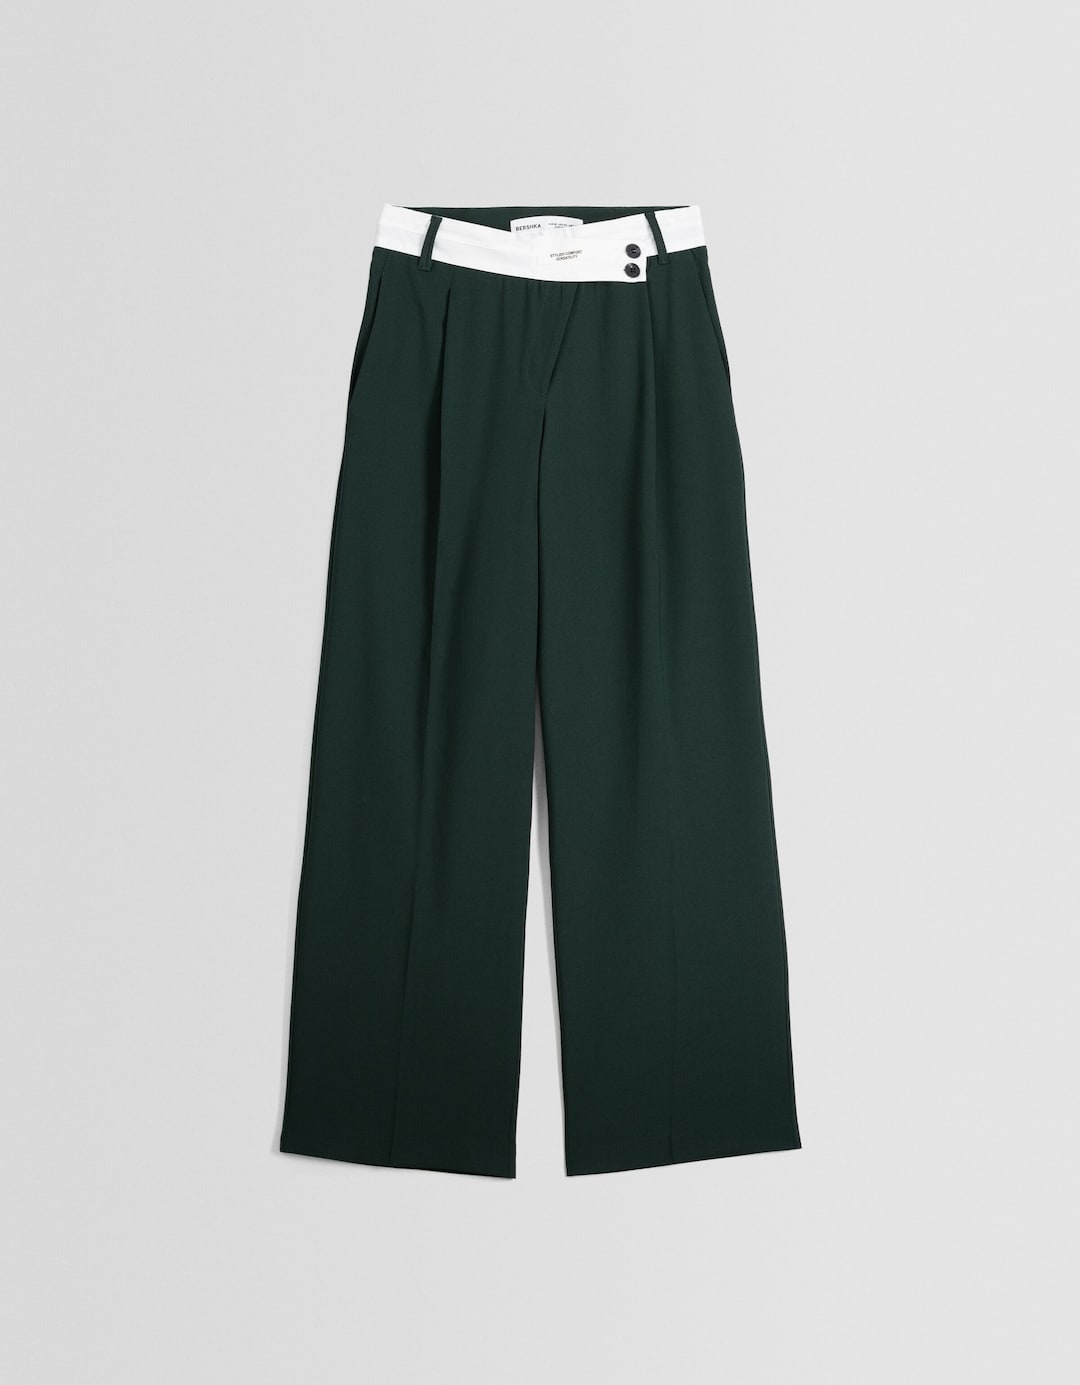 Tailored dad fit trousers with contrast waistband